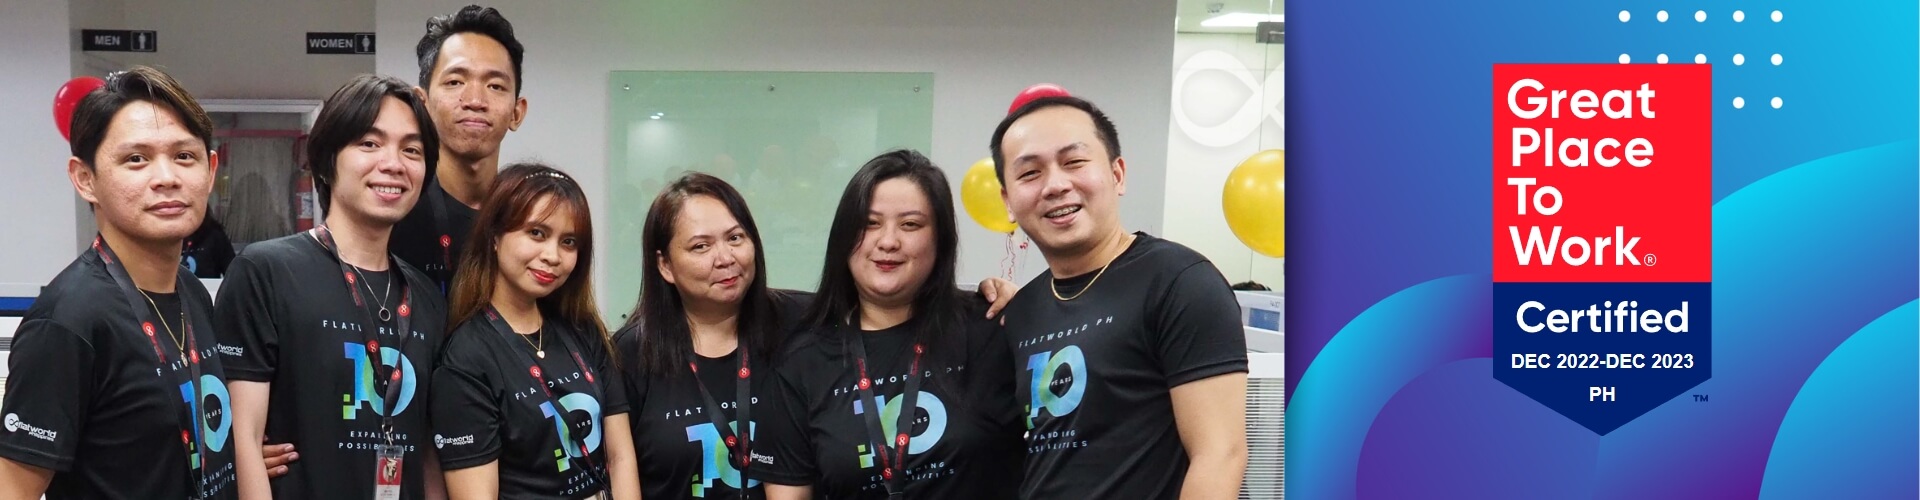 Flatworld Philippines is Great Place to Work Certified for the Second Time in a Row